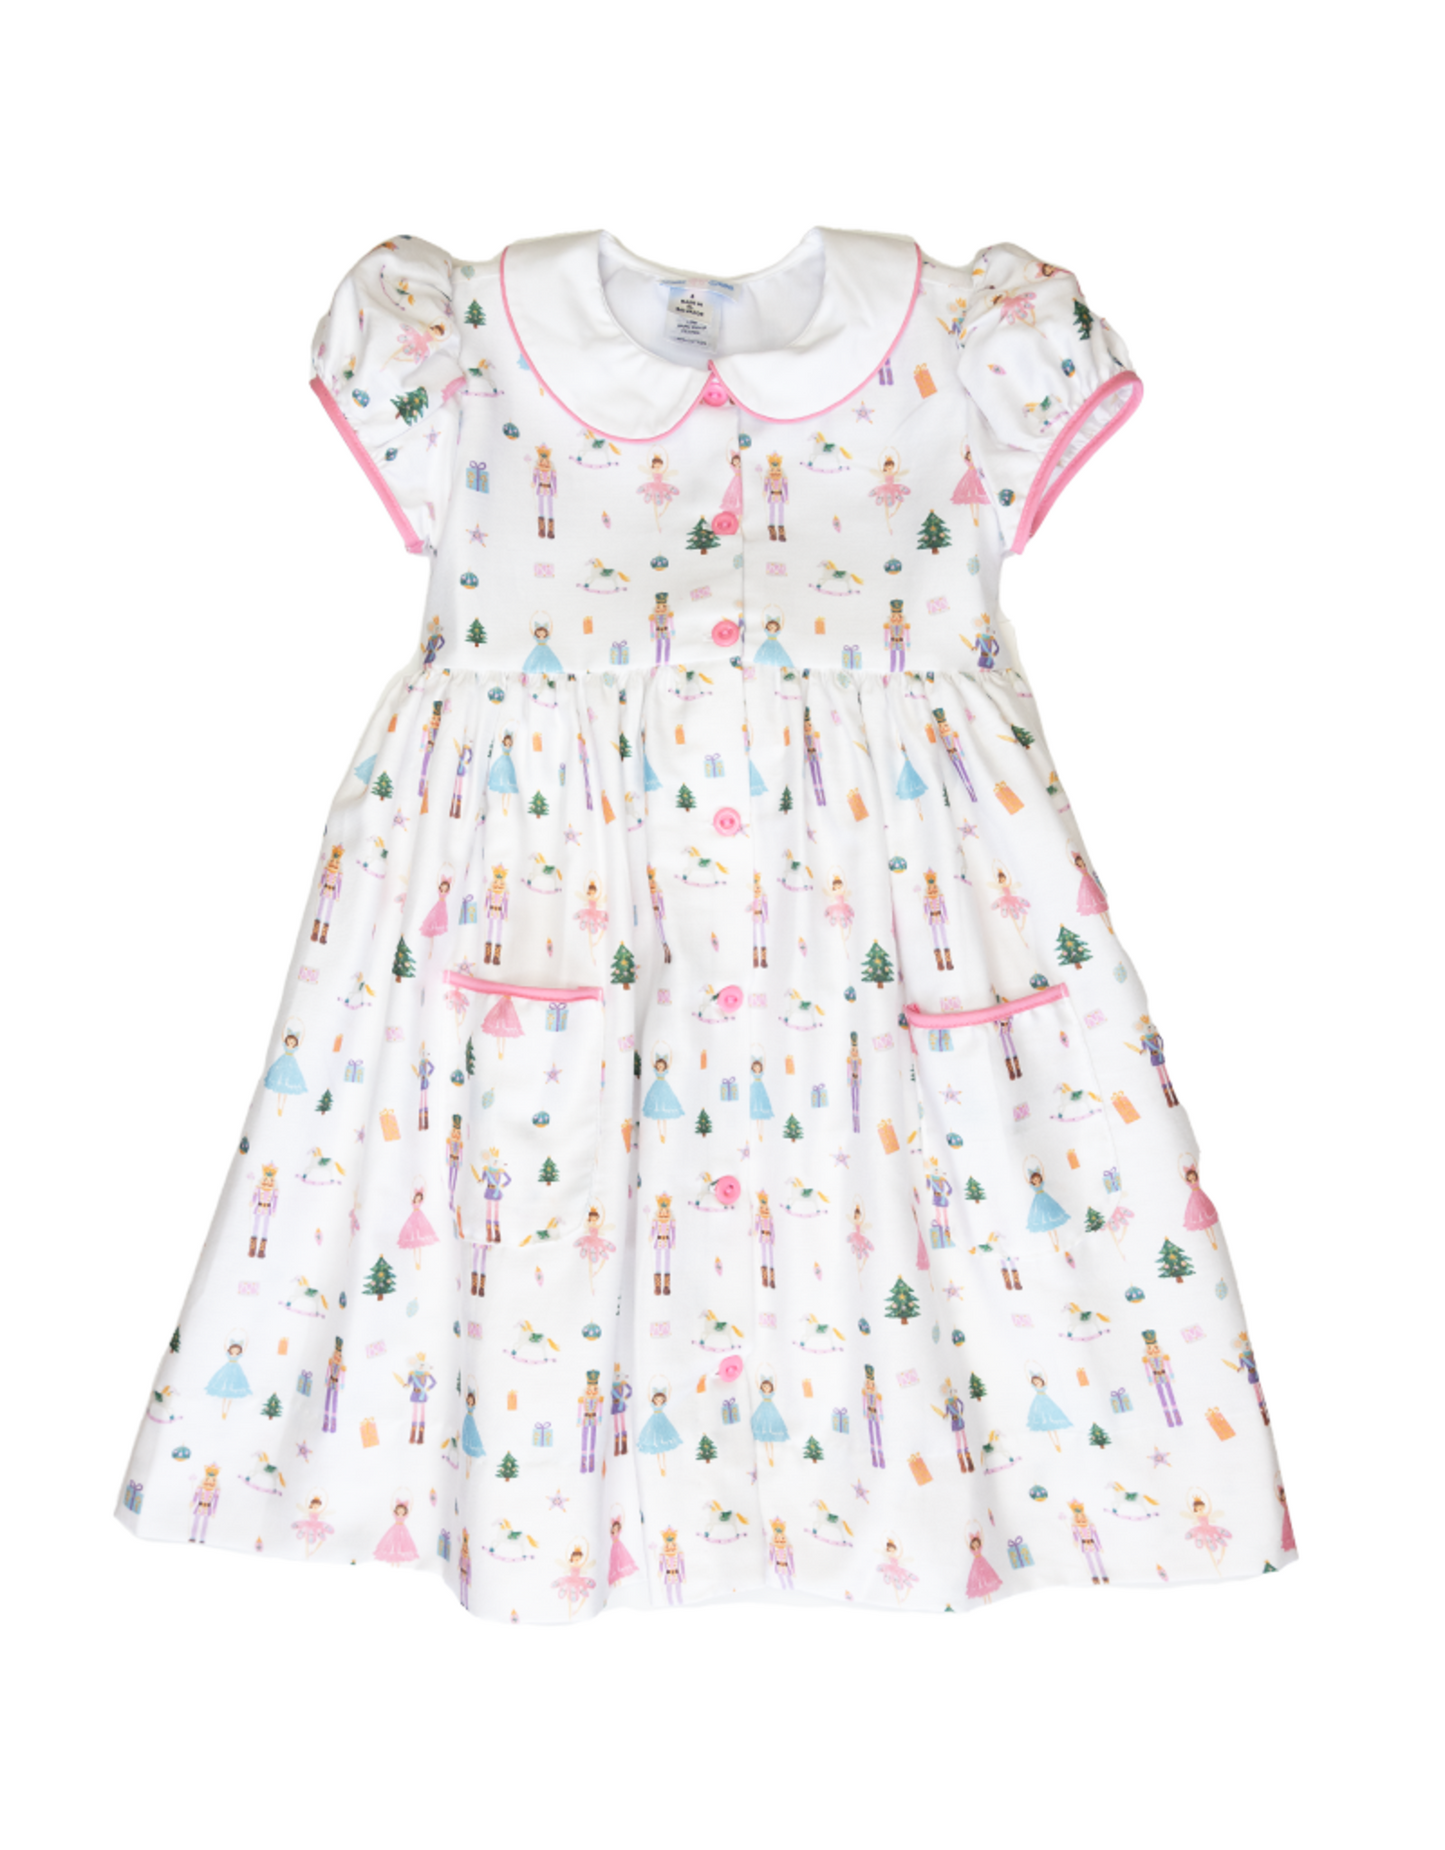 Girls Nutcracker dress by Lulu Bebe with pockets and a scalloped collar. 